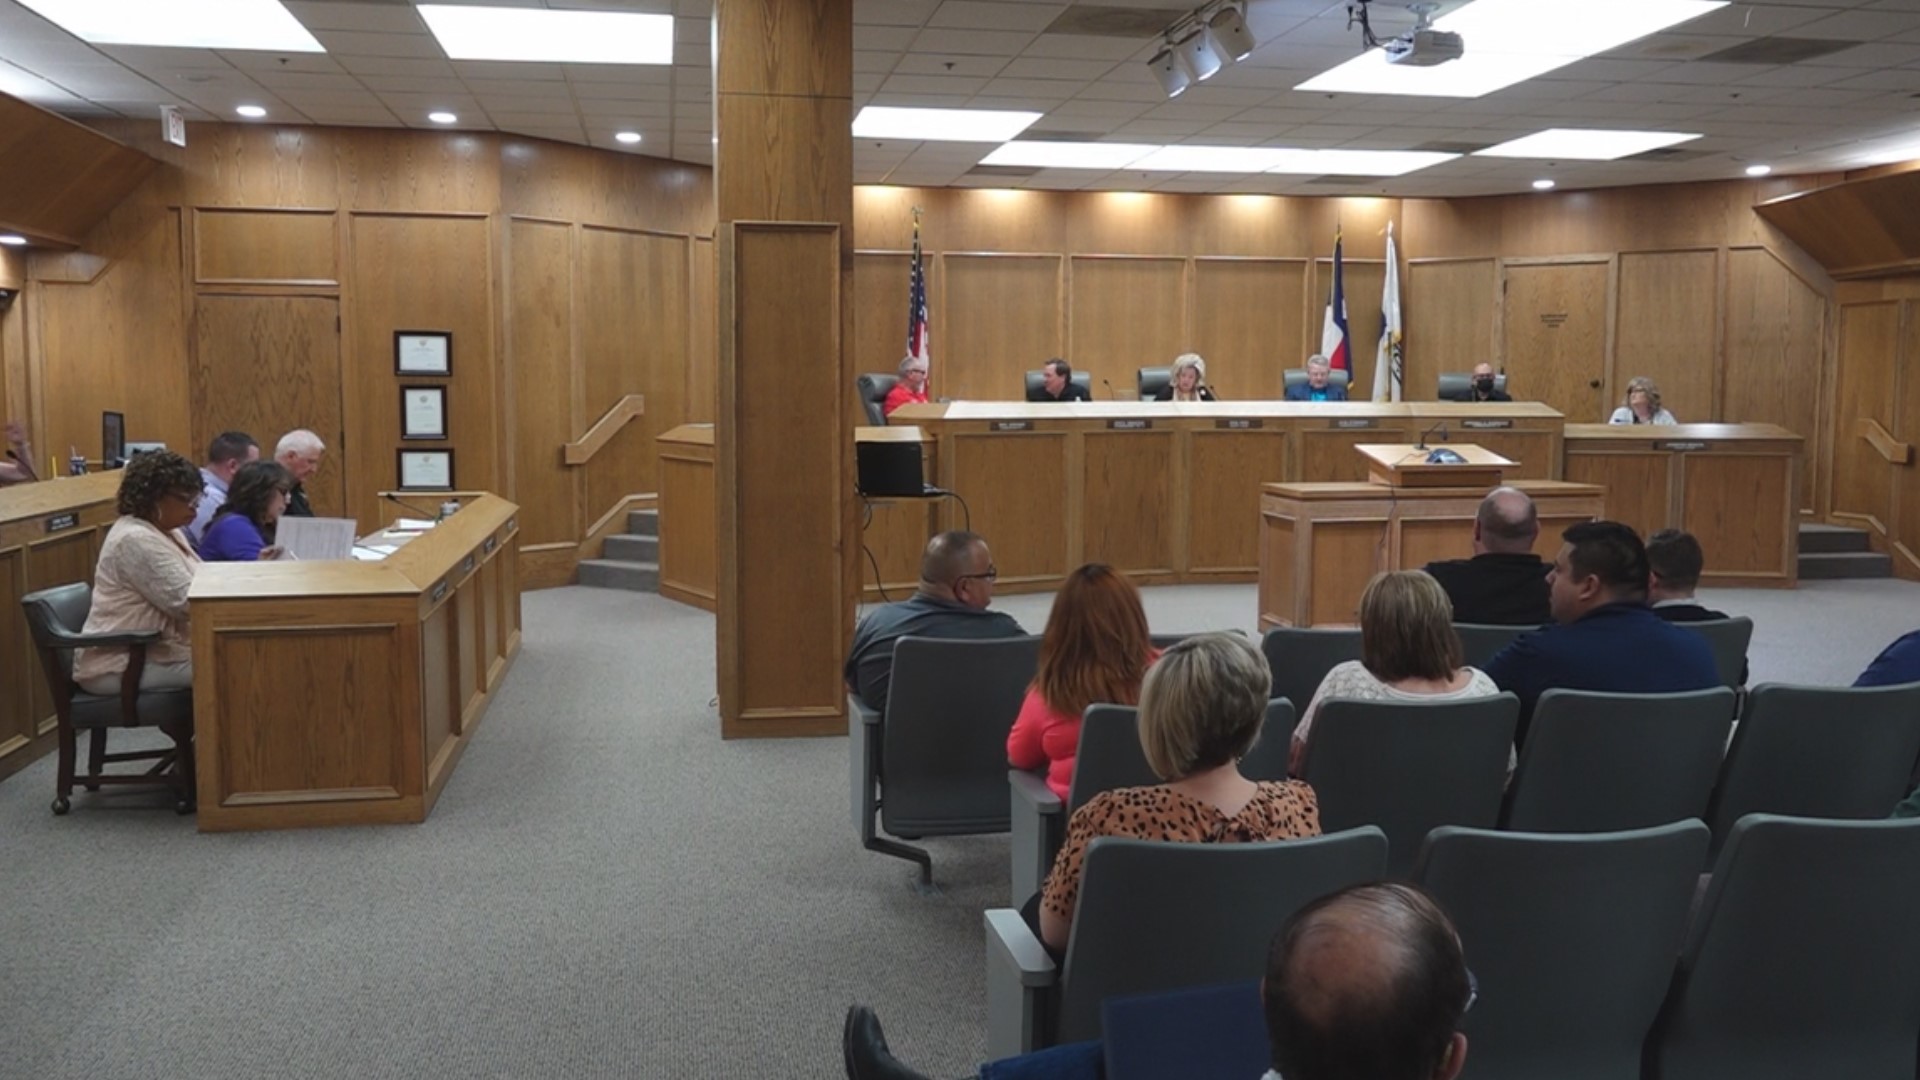 The commissioners court has been working with the same law firm that helped Midland County redraw their district lines.